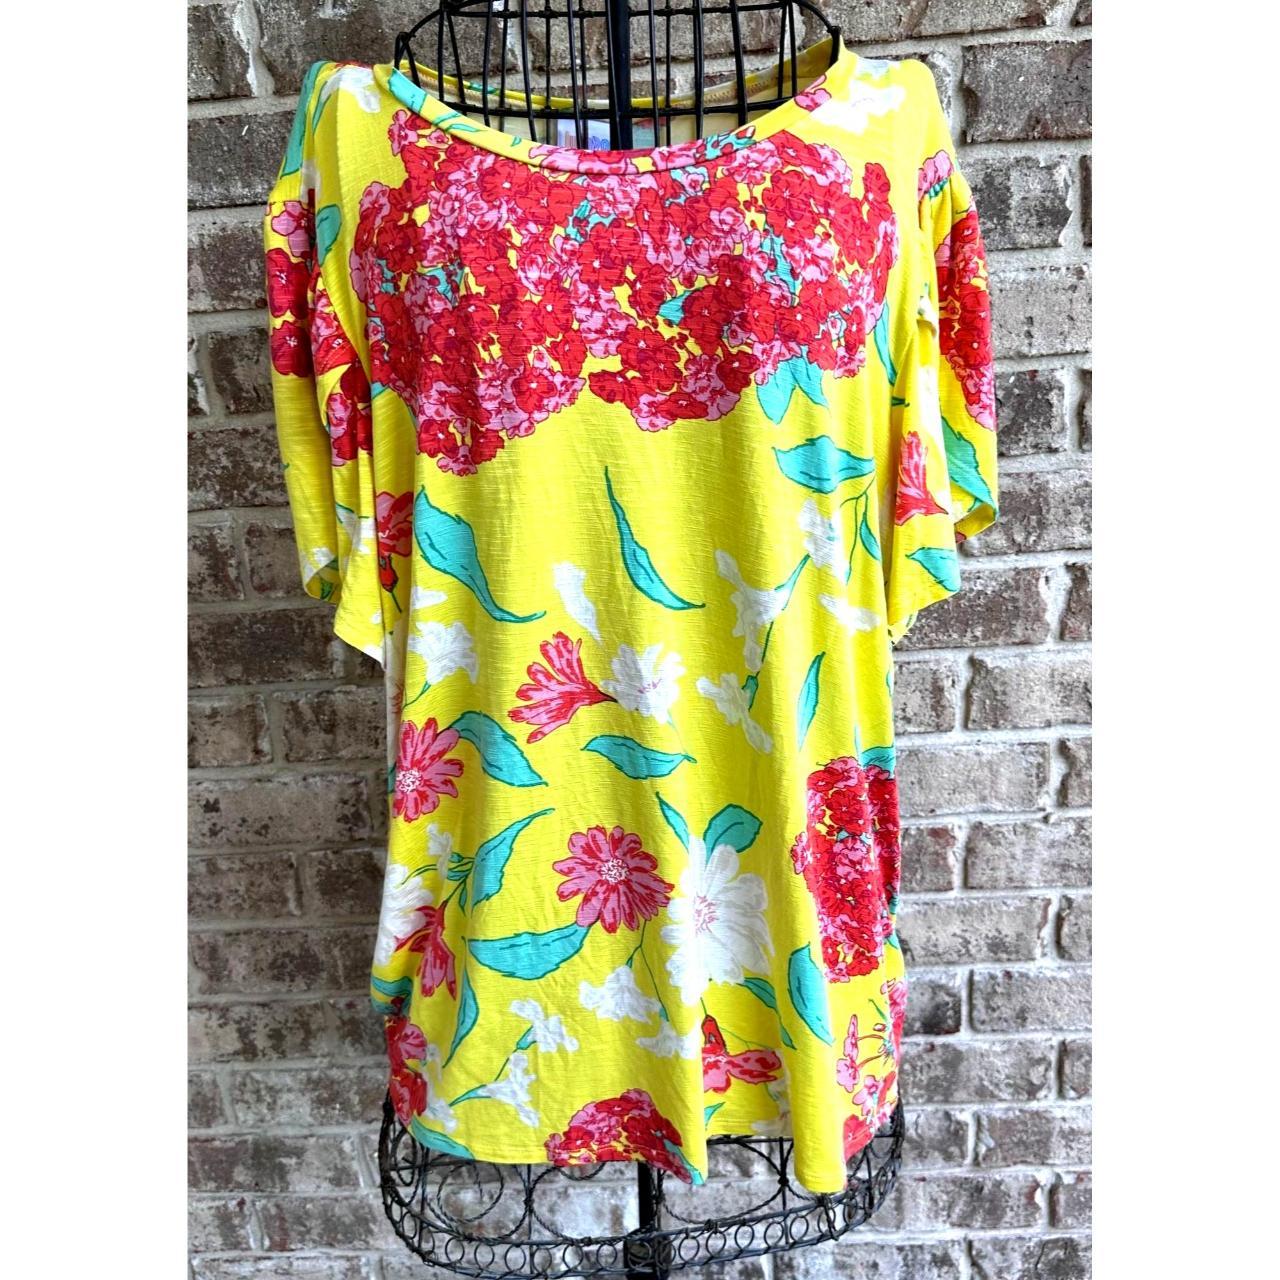 NWT - LuLaRoe Olive Top - Various Prints and Sizes